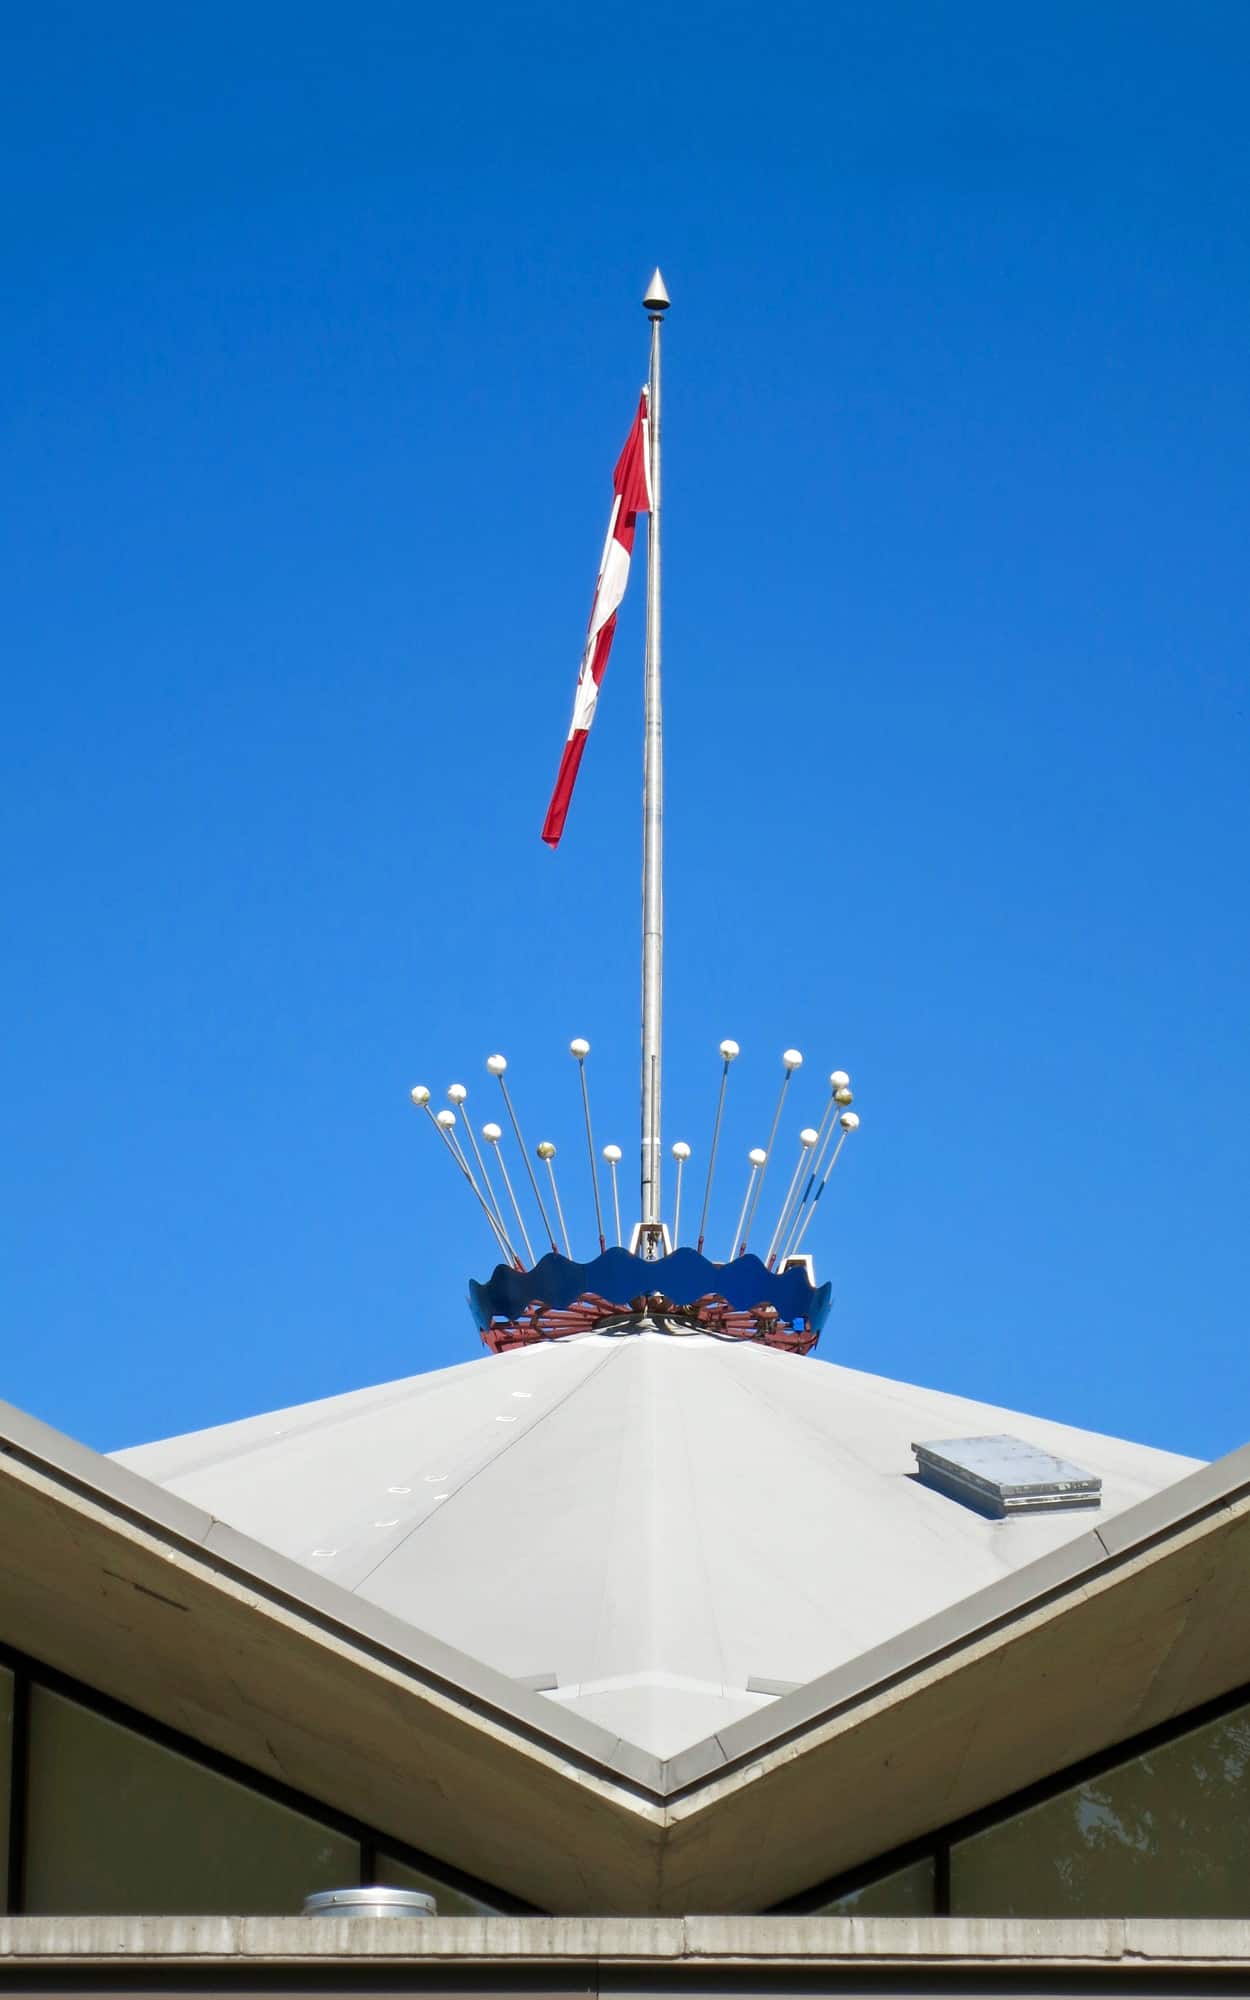 Roof-top flagpole and coronet finial